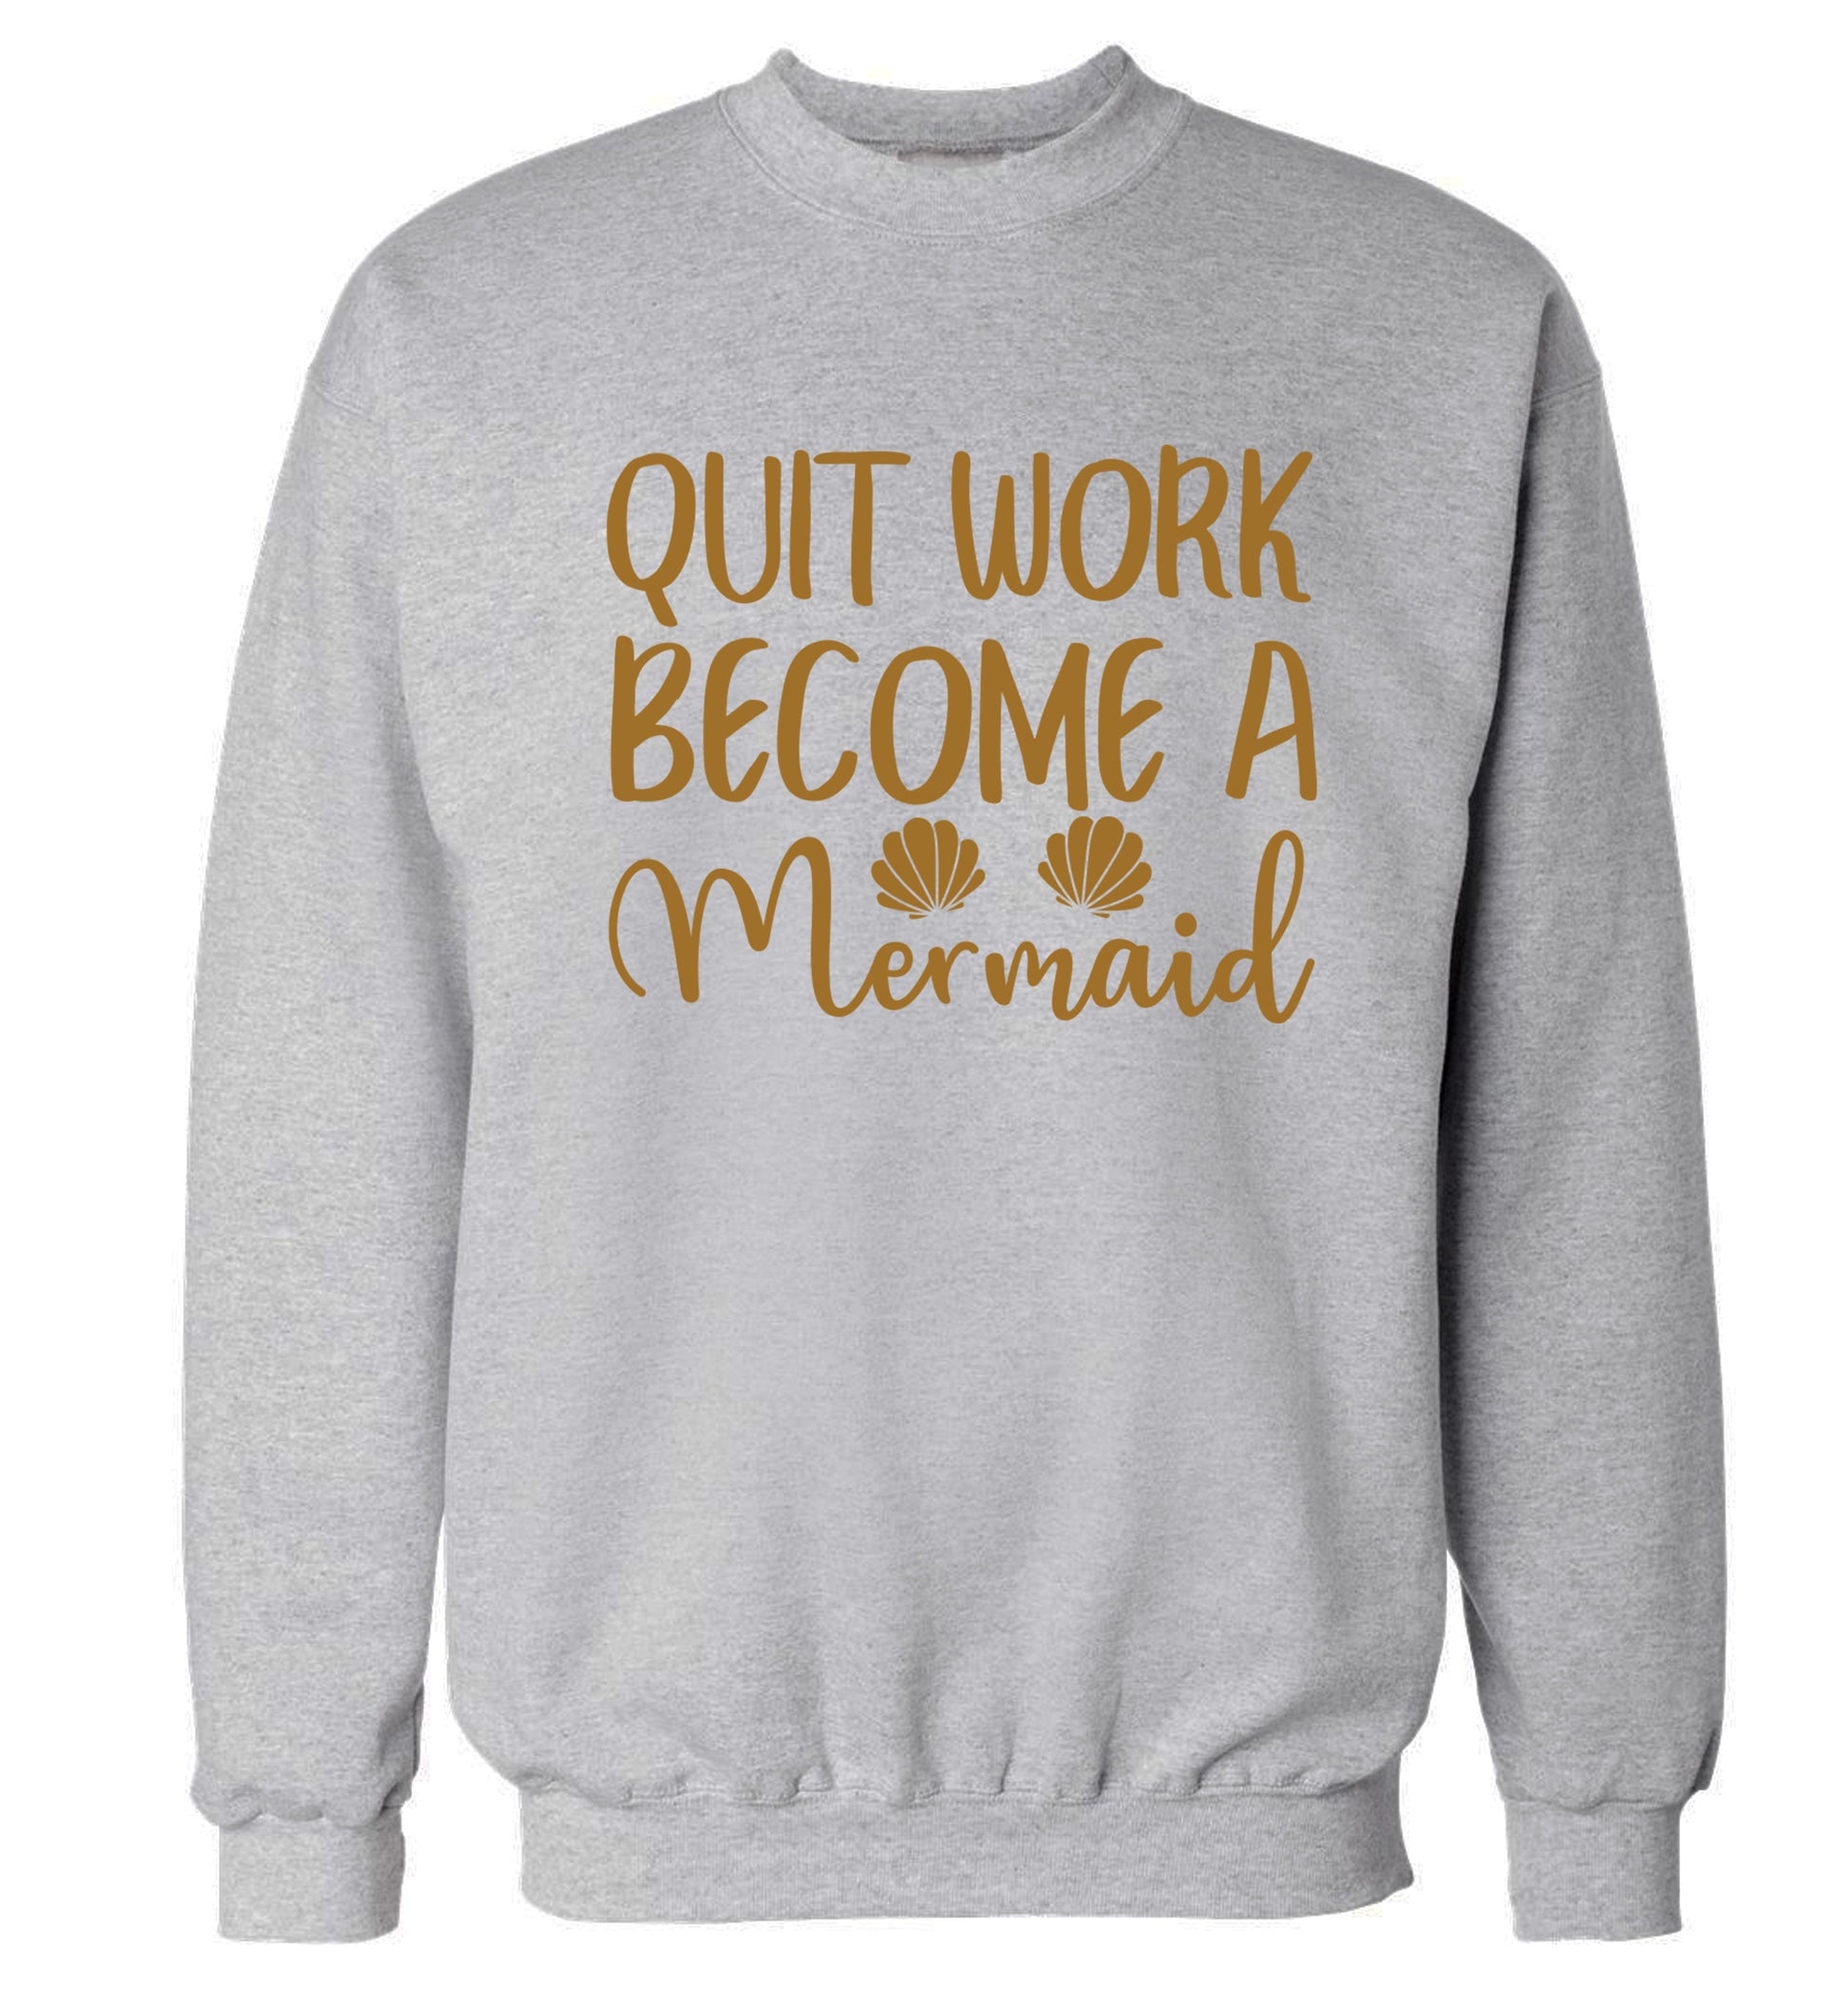 Quit work become a mermaid Adult's unisex grey Sweater 2XL